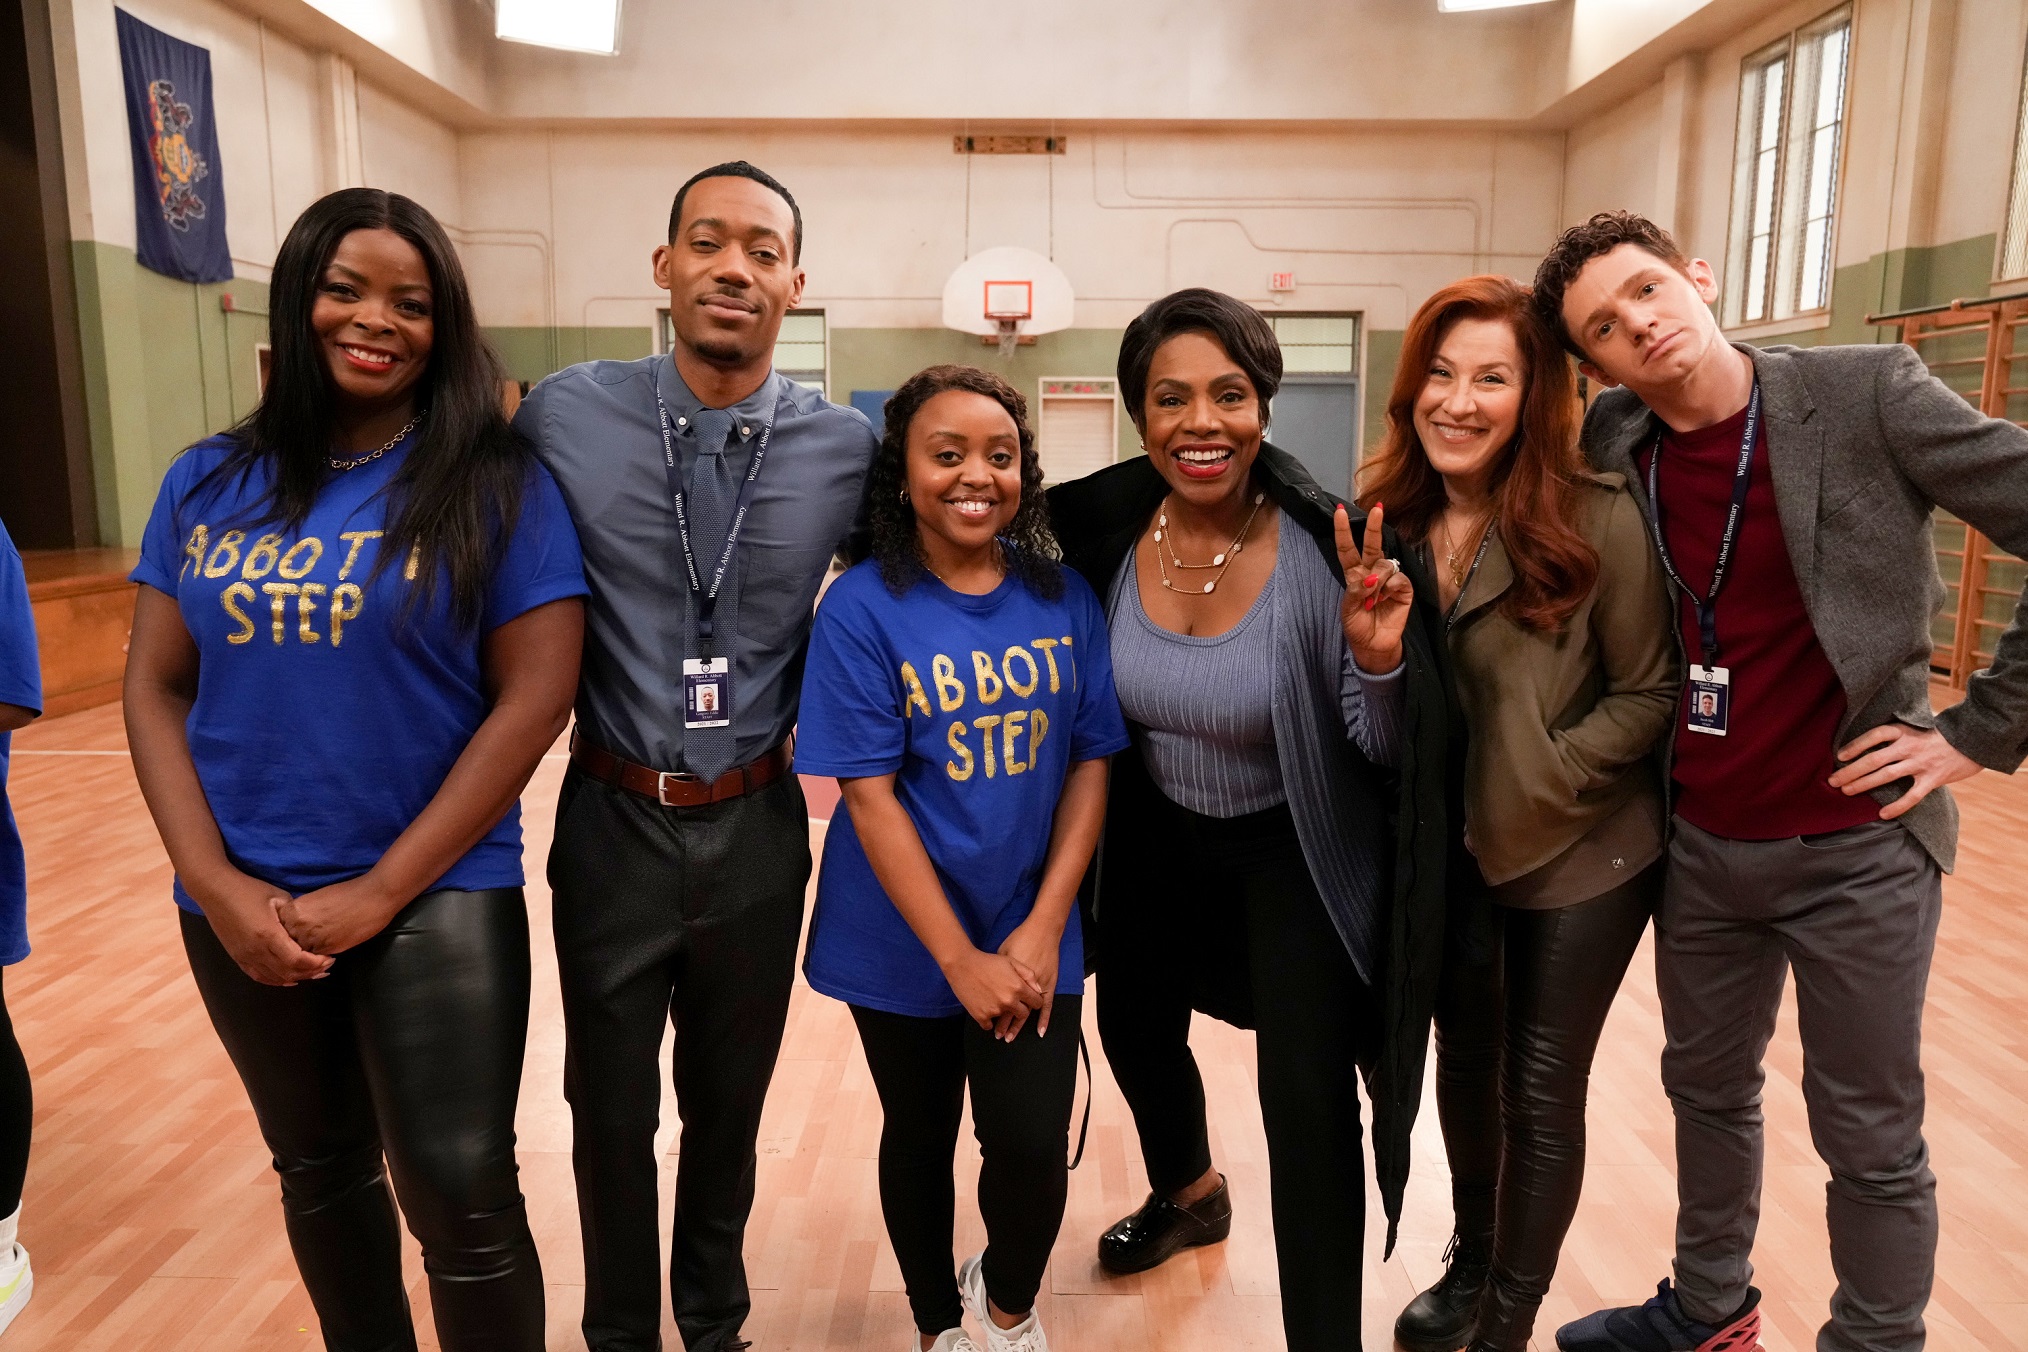 Teachers’ Humanity Mixed With Comedy And Benevolence: ‘Abbott Elementary’ Season 1 Finale